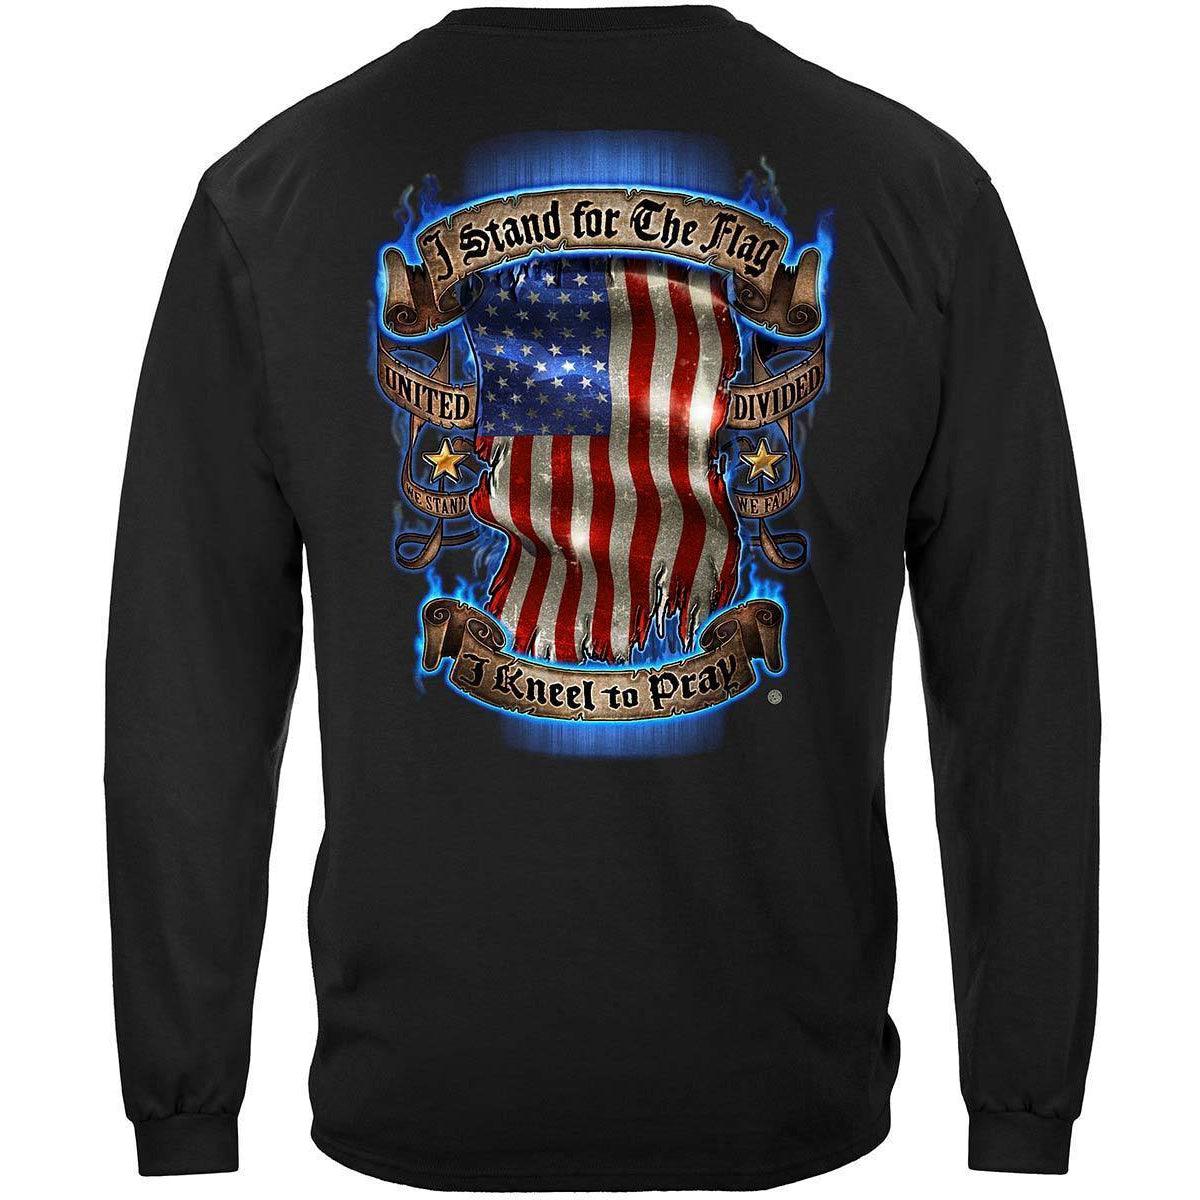 I Stand for the Flag Premium T-Shirt - Military Republic